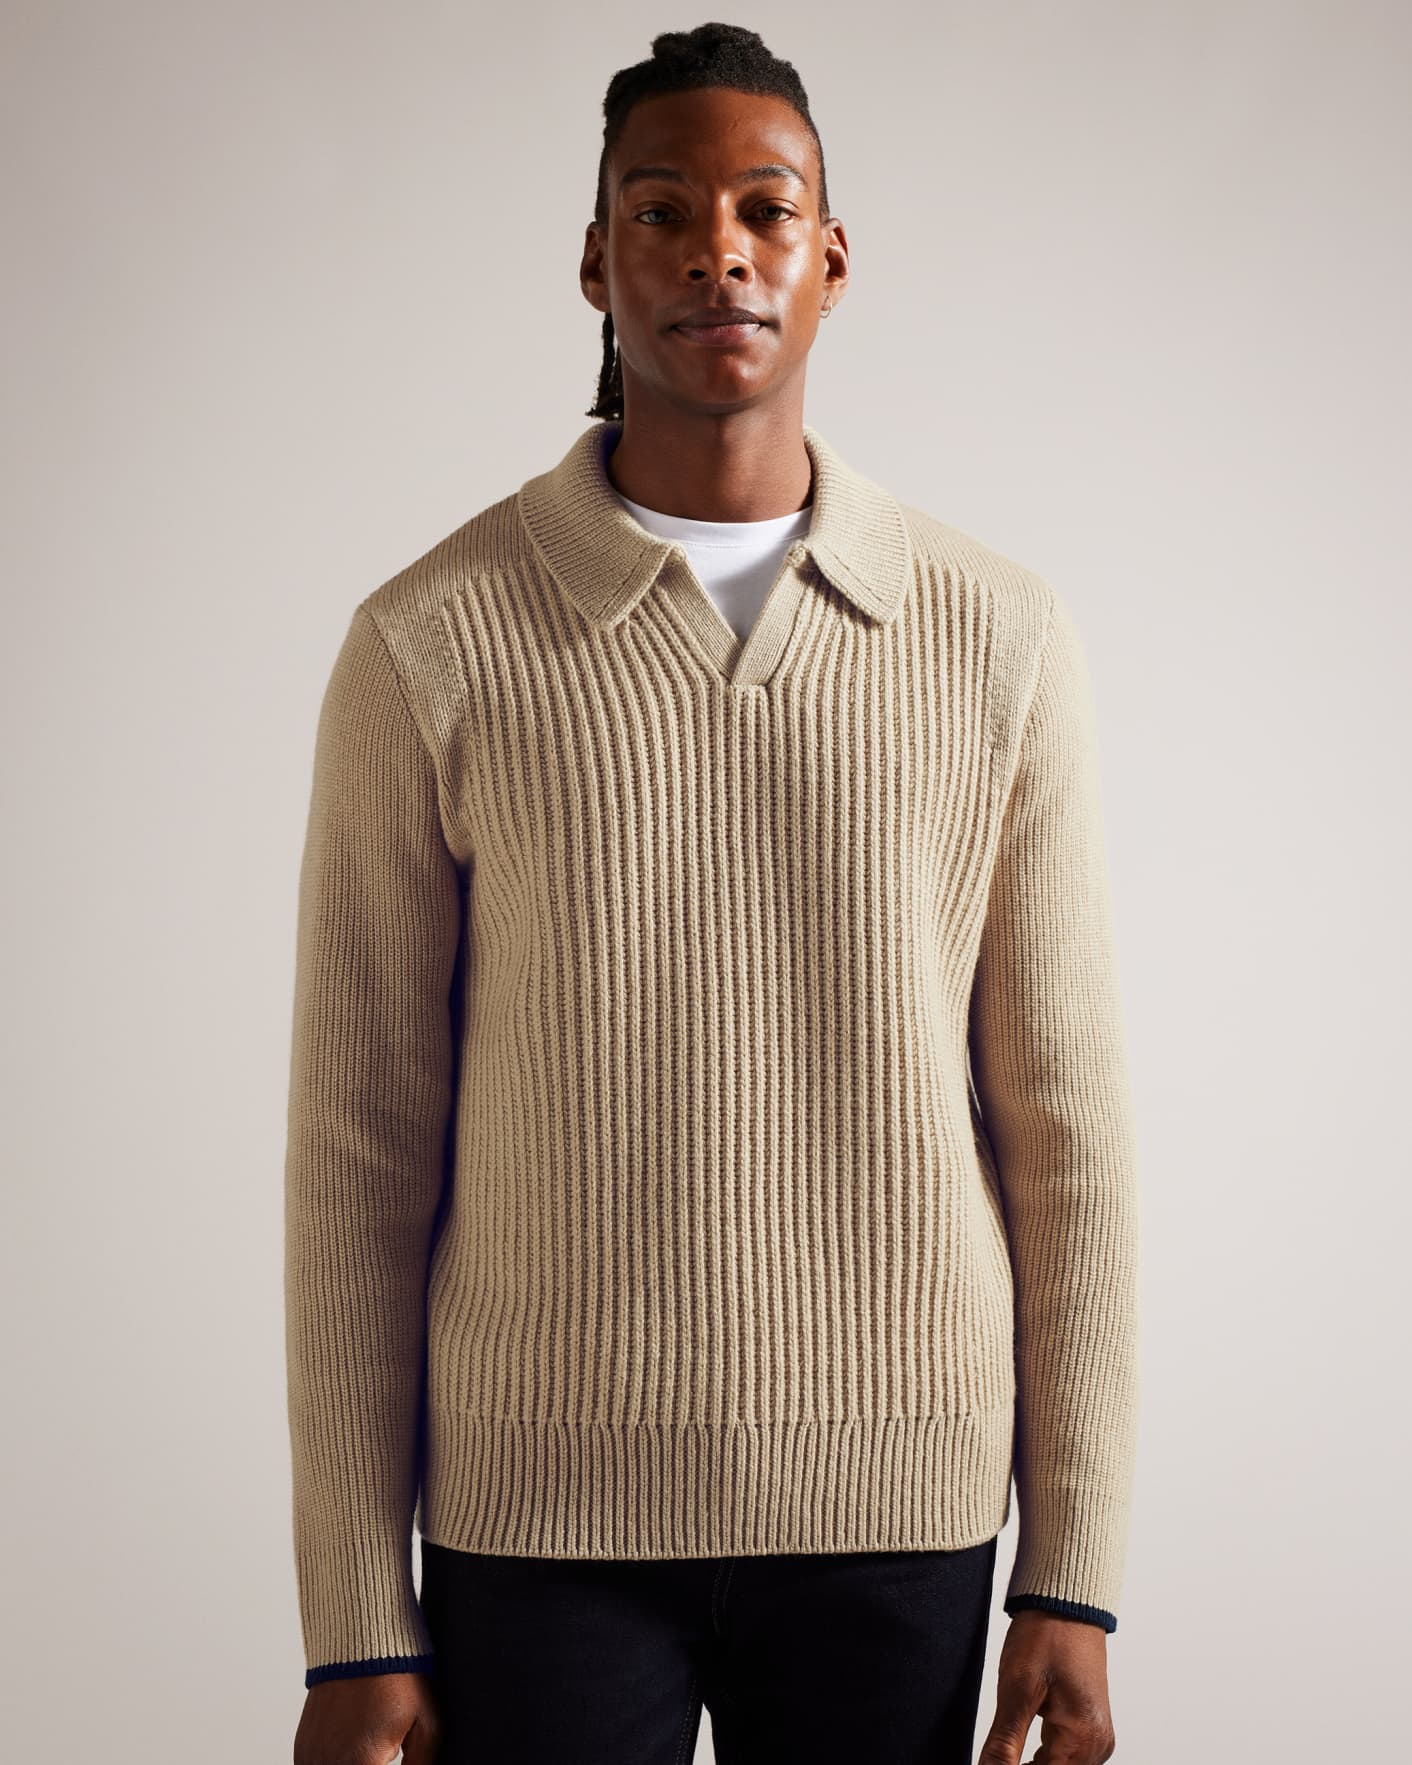 ADEMY - TAUPE, Knitwear